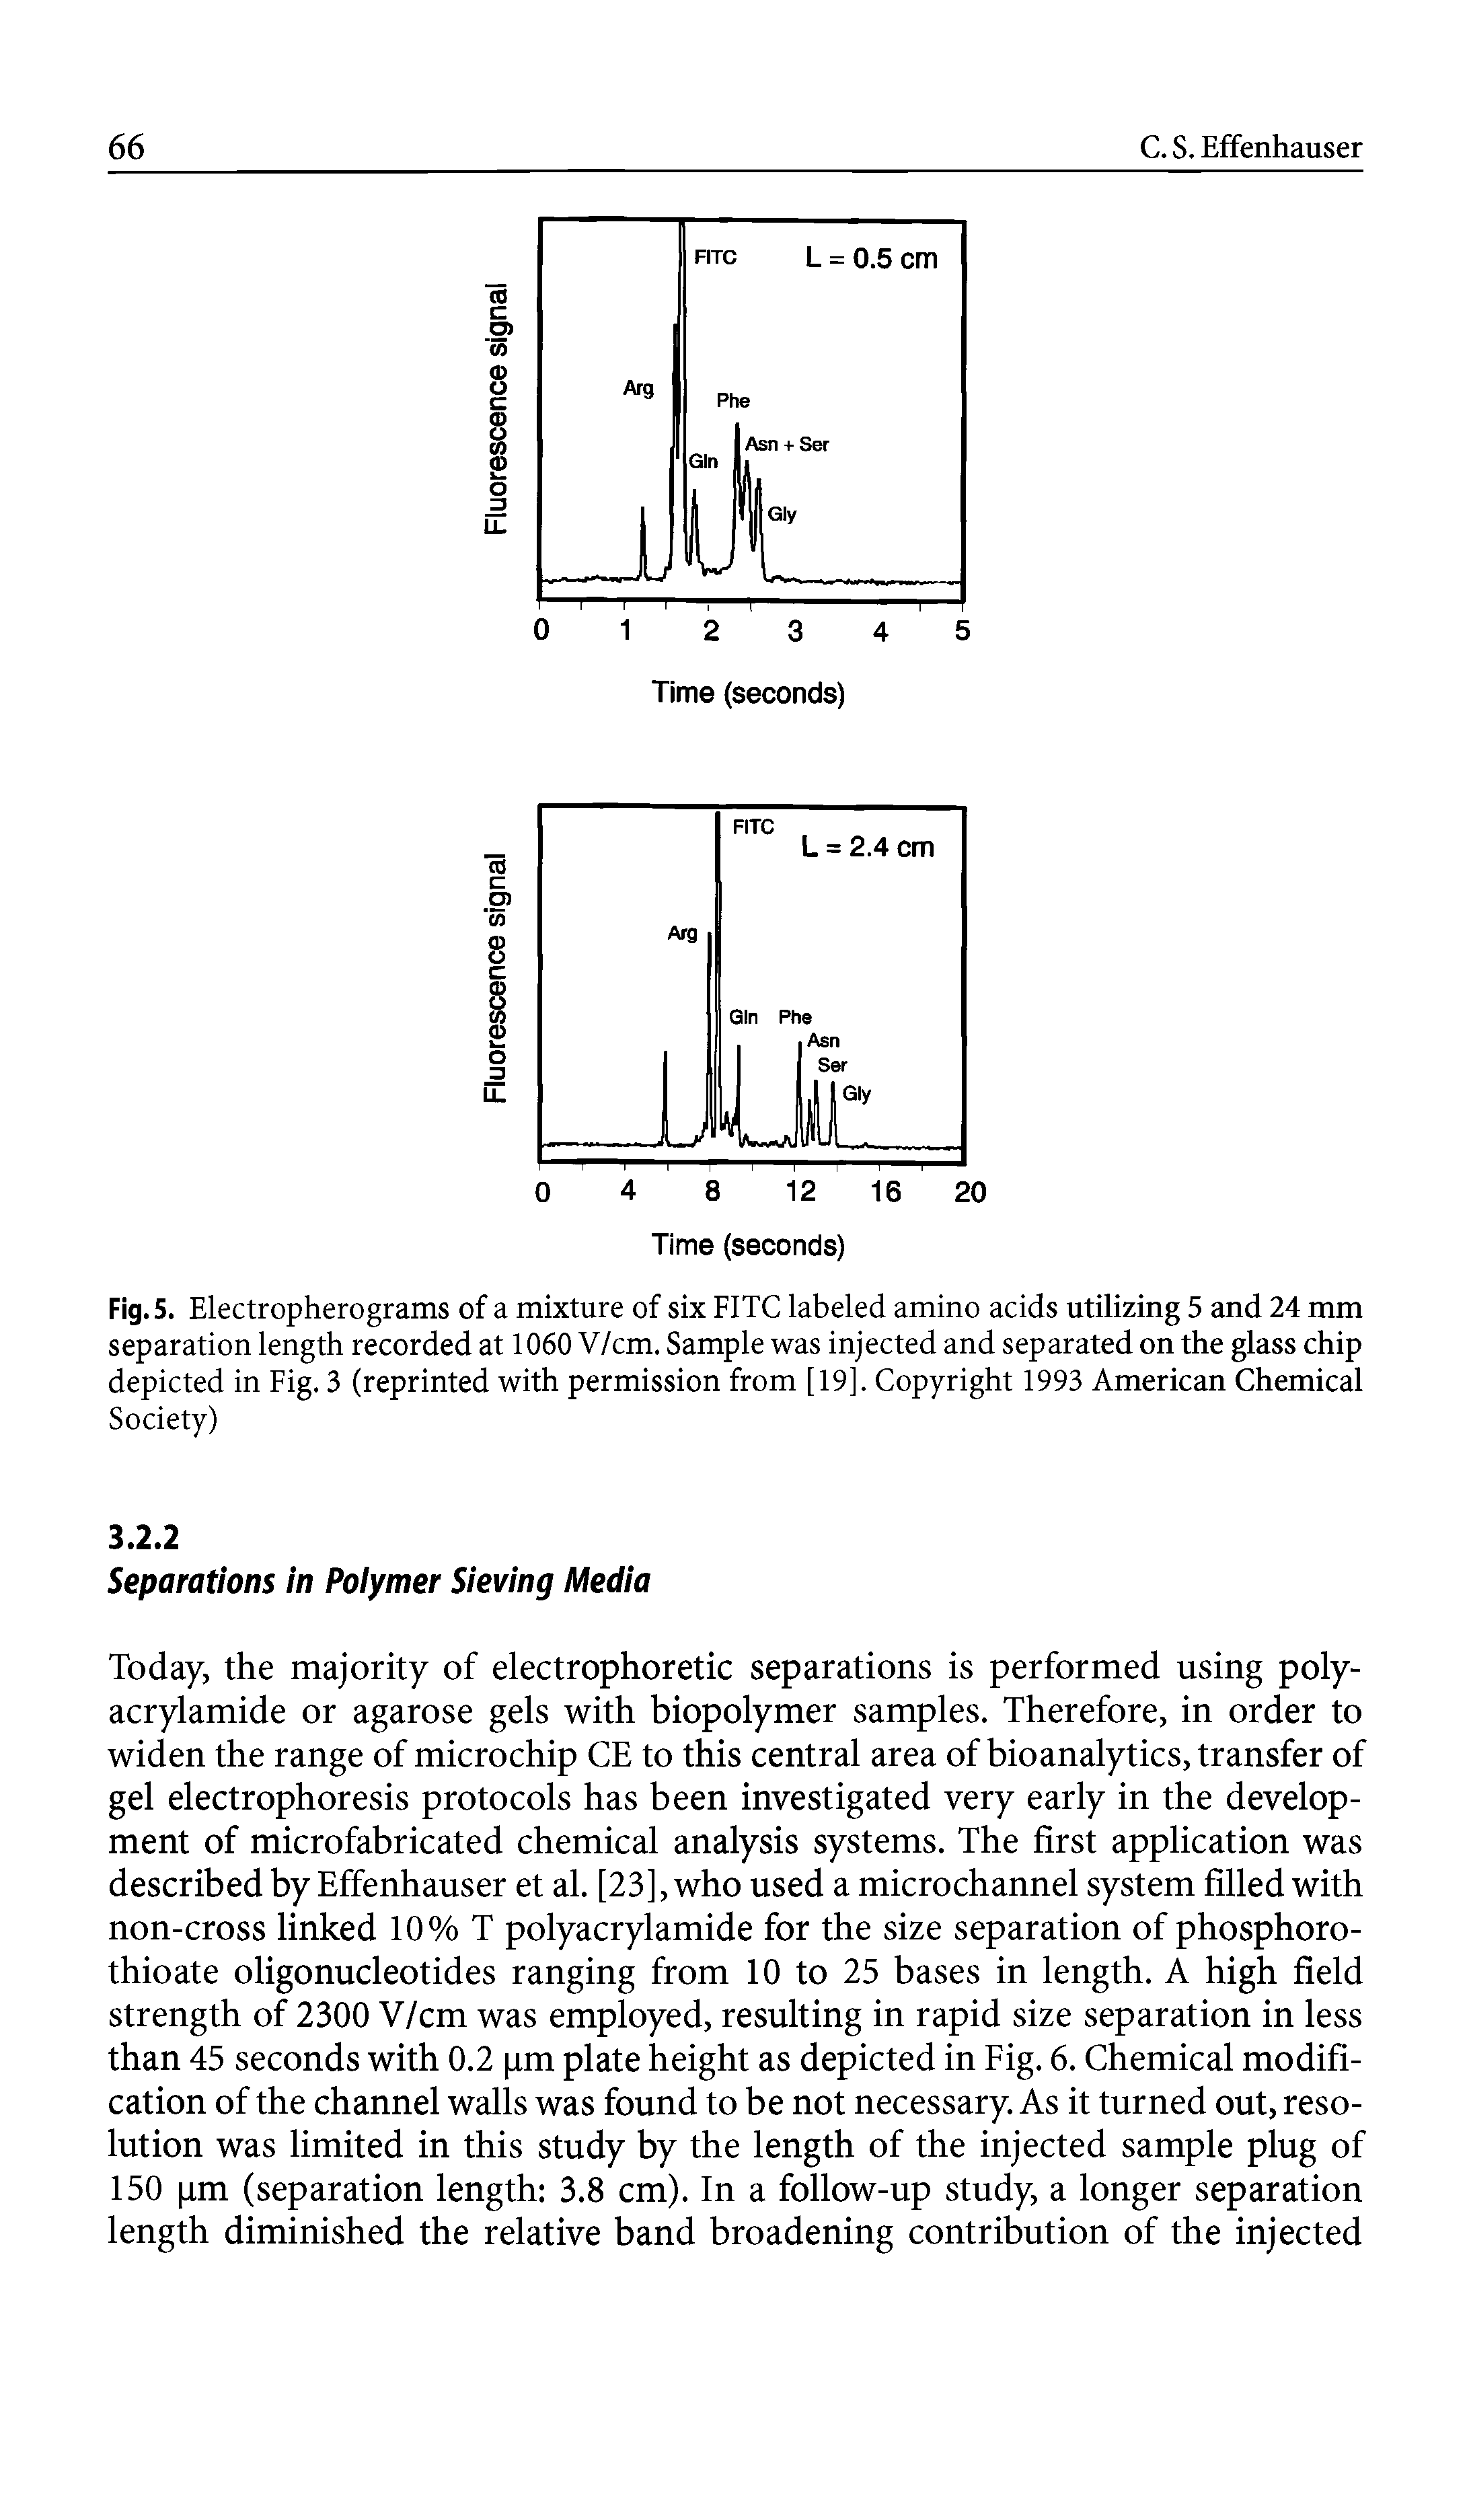 Fig. 5. Electropherograms of a mixture of six FITC labeled amino acids utilizing 5 and 24 mm separation length recorded at 1060 V/cm. Sample was injected and separated on the glass chip depicted in Fig. 3 (reprinted with permission from [19]. Copyright 1993 American Chemical Society)...